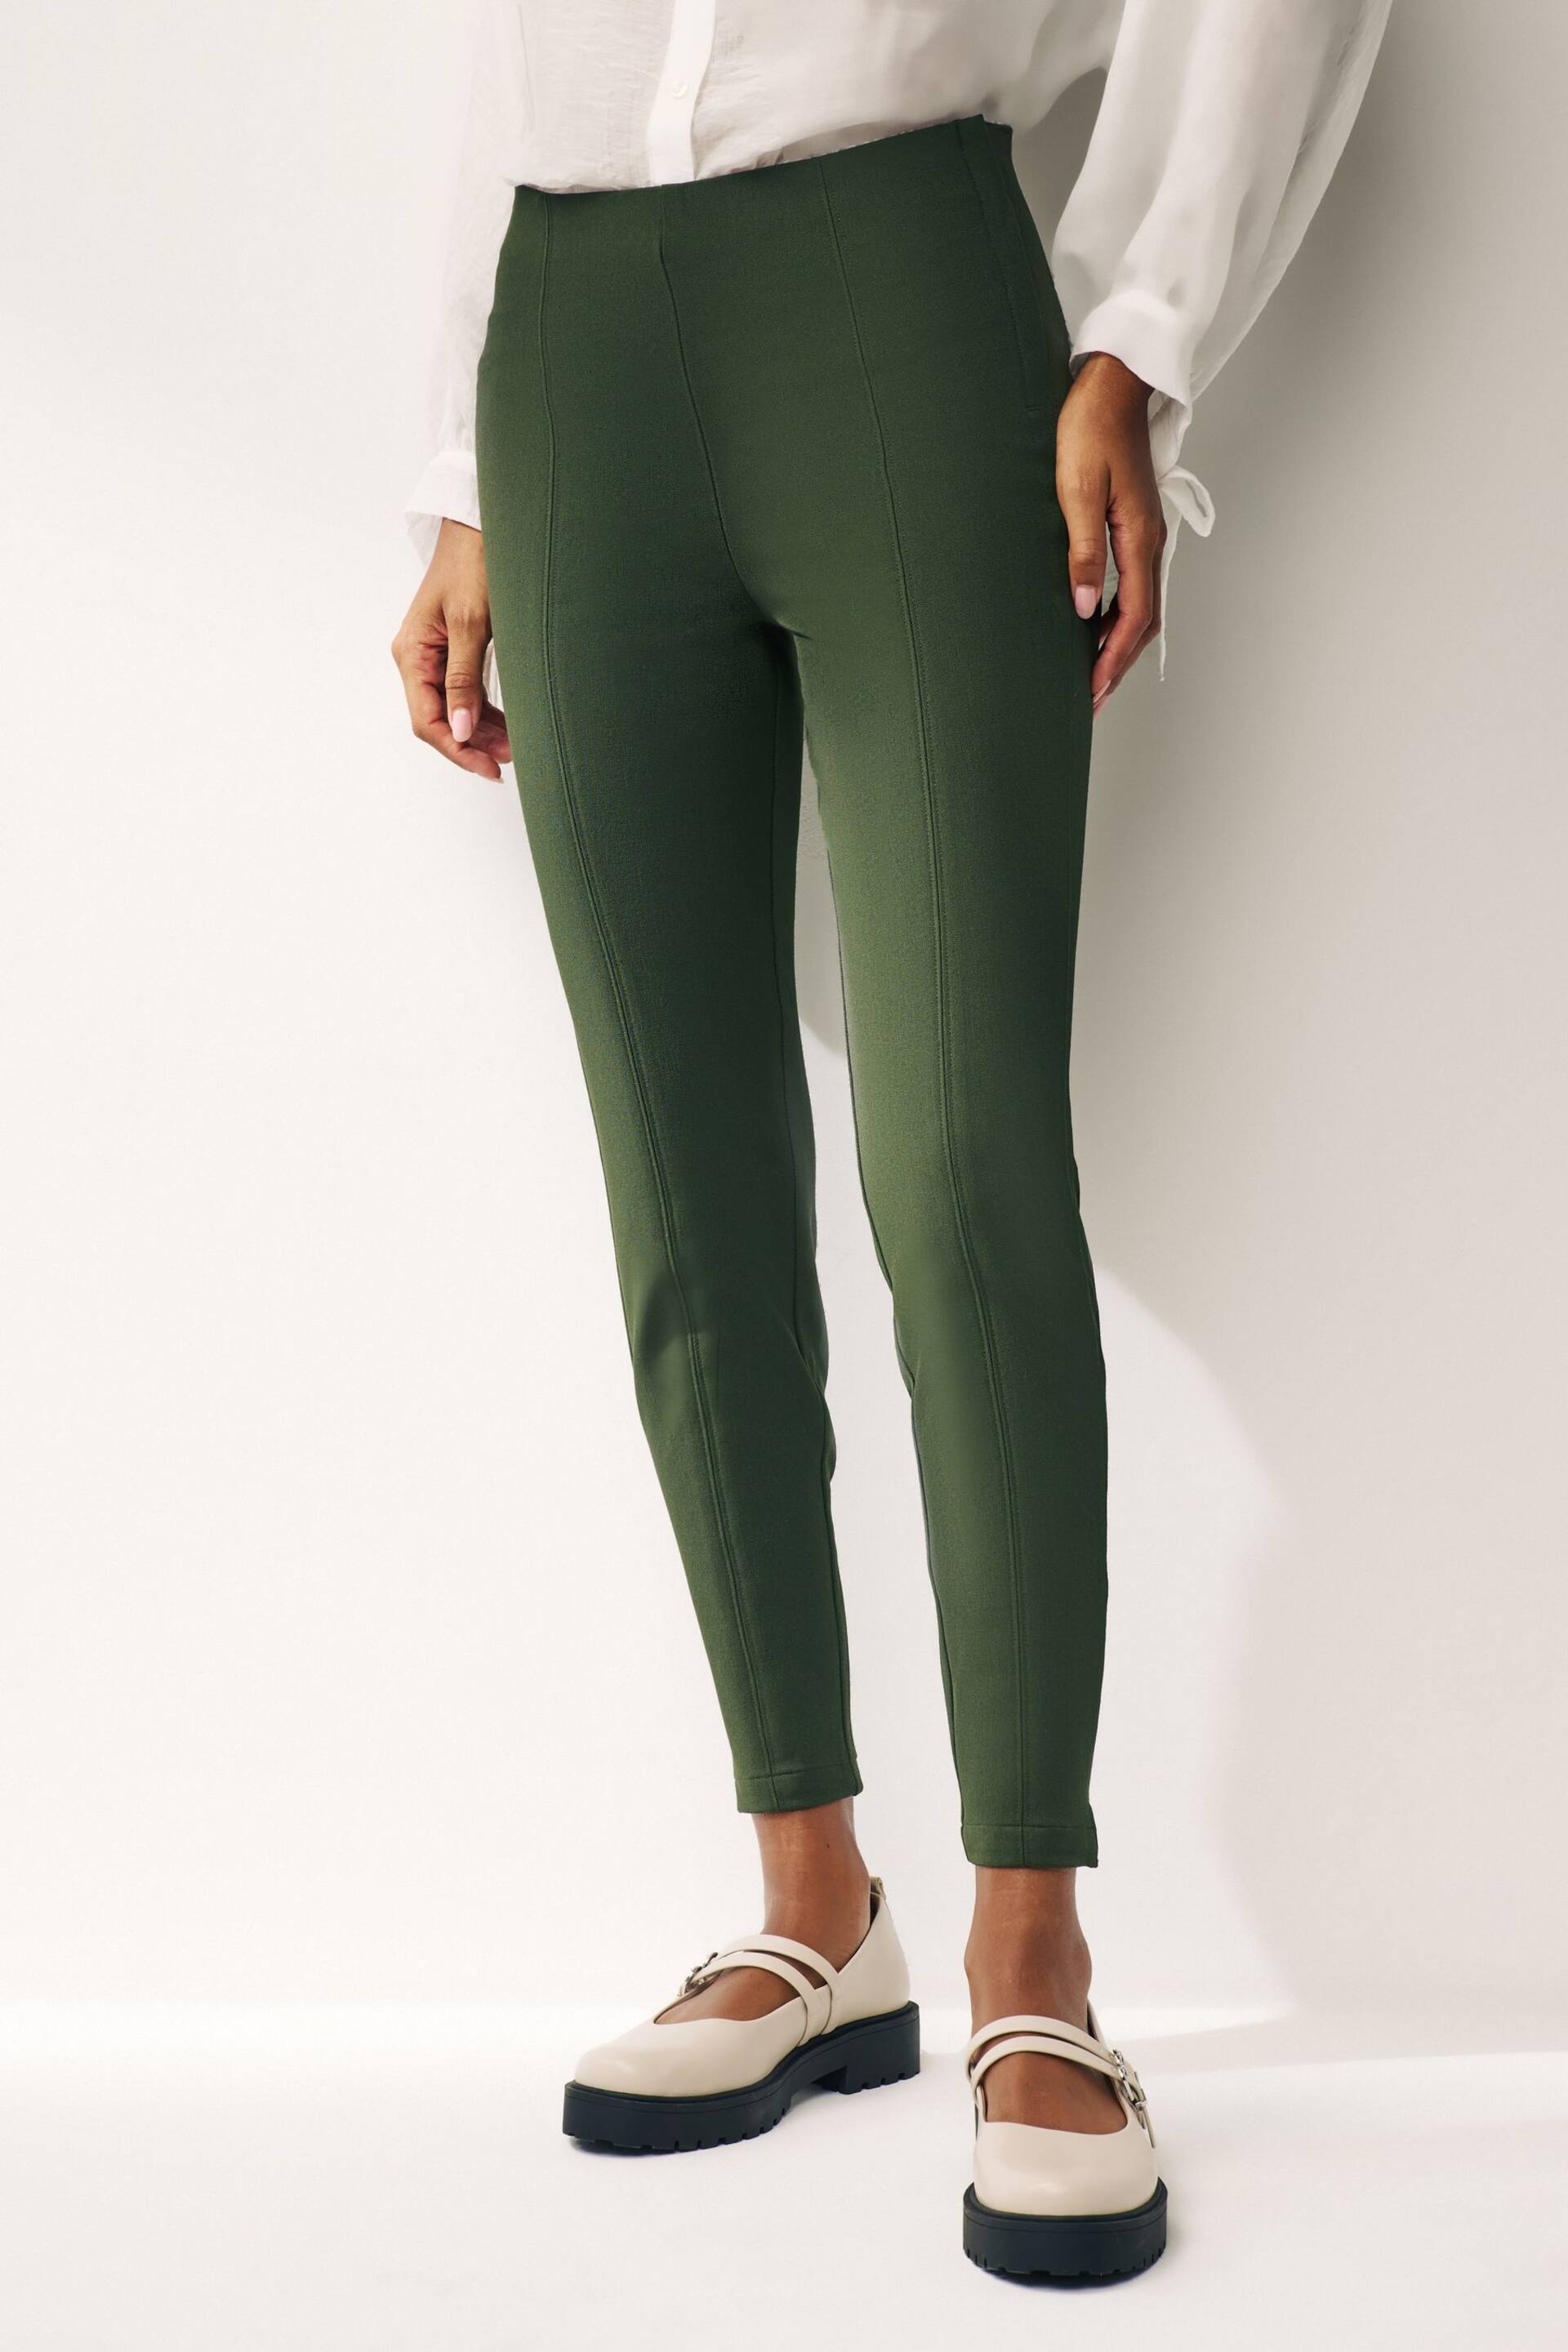 Khaki Green Ultimate Stretch Skinny Trousers - Image 1 of 6